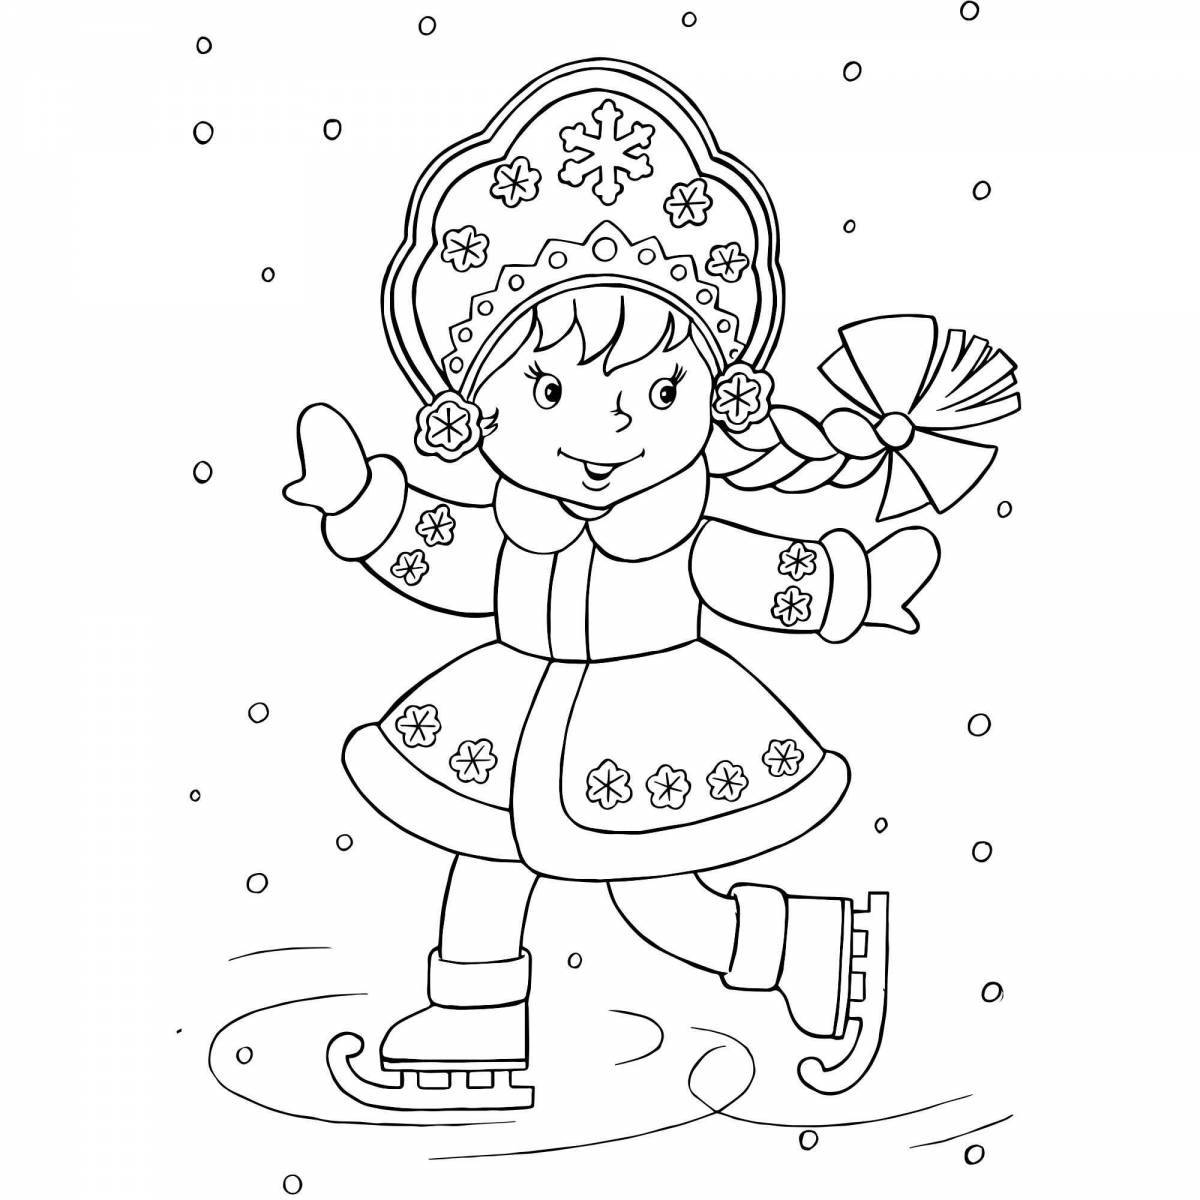 Snow Maiden coloring book for kids